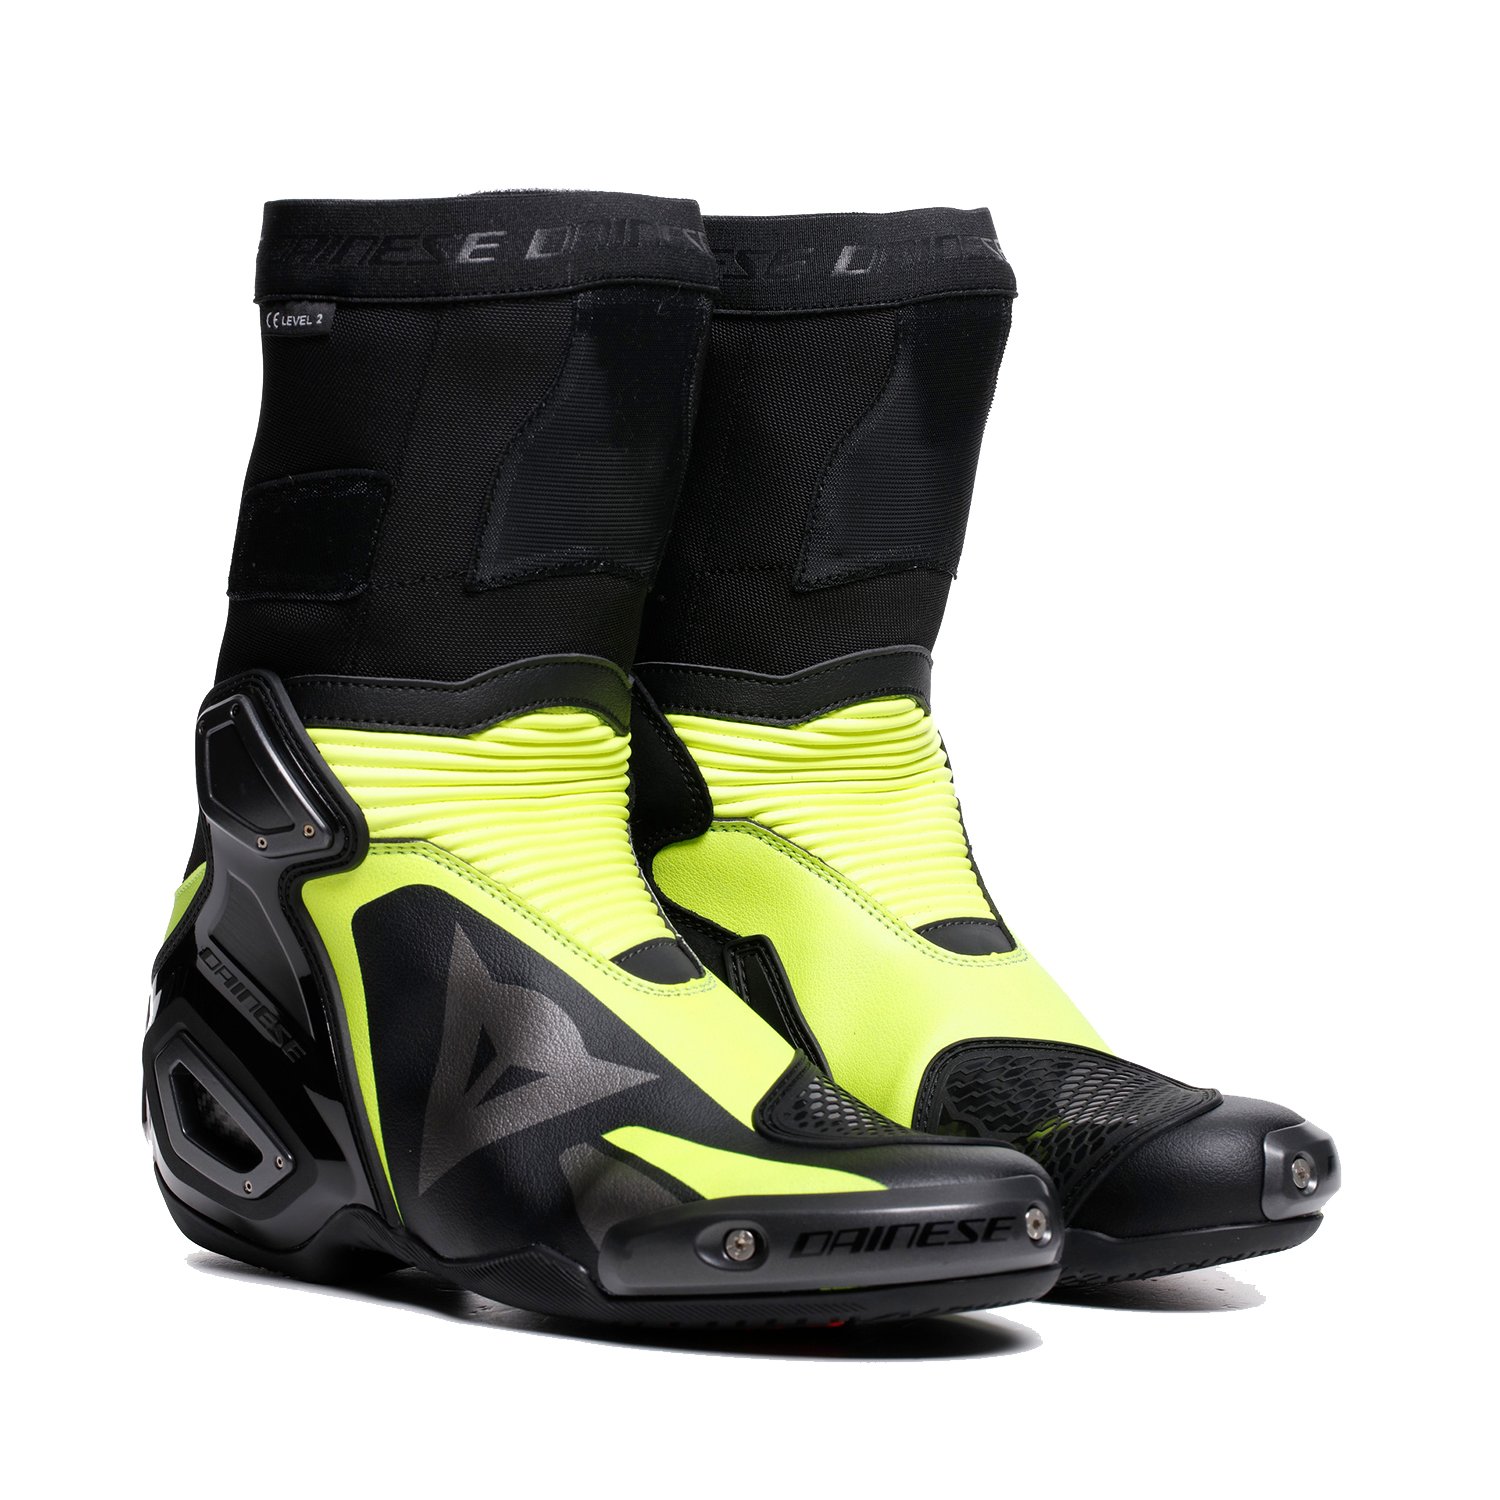 Image of Dainese Axial 2 Boots Black Yellow Fluo Talla 41